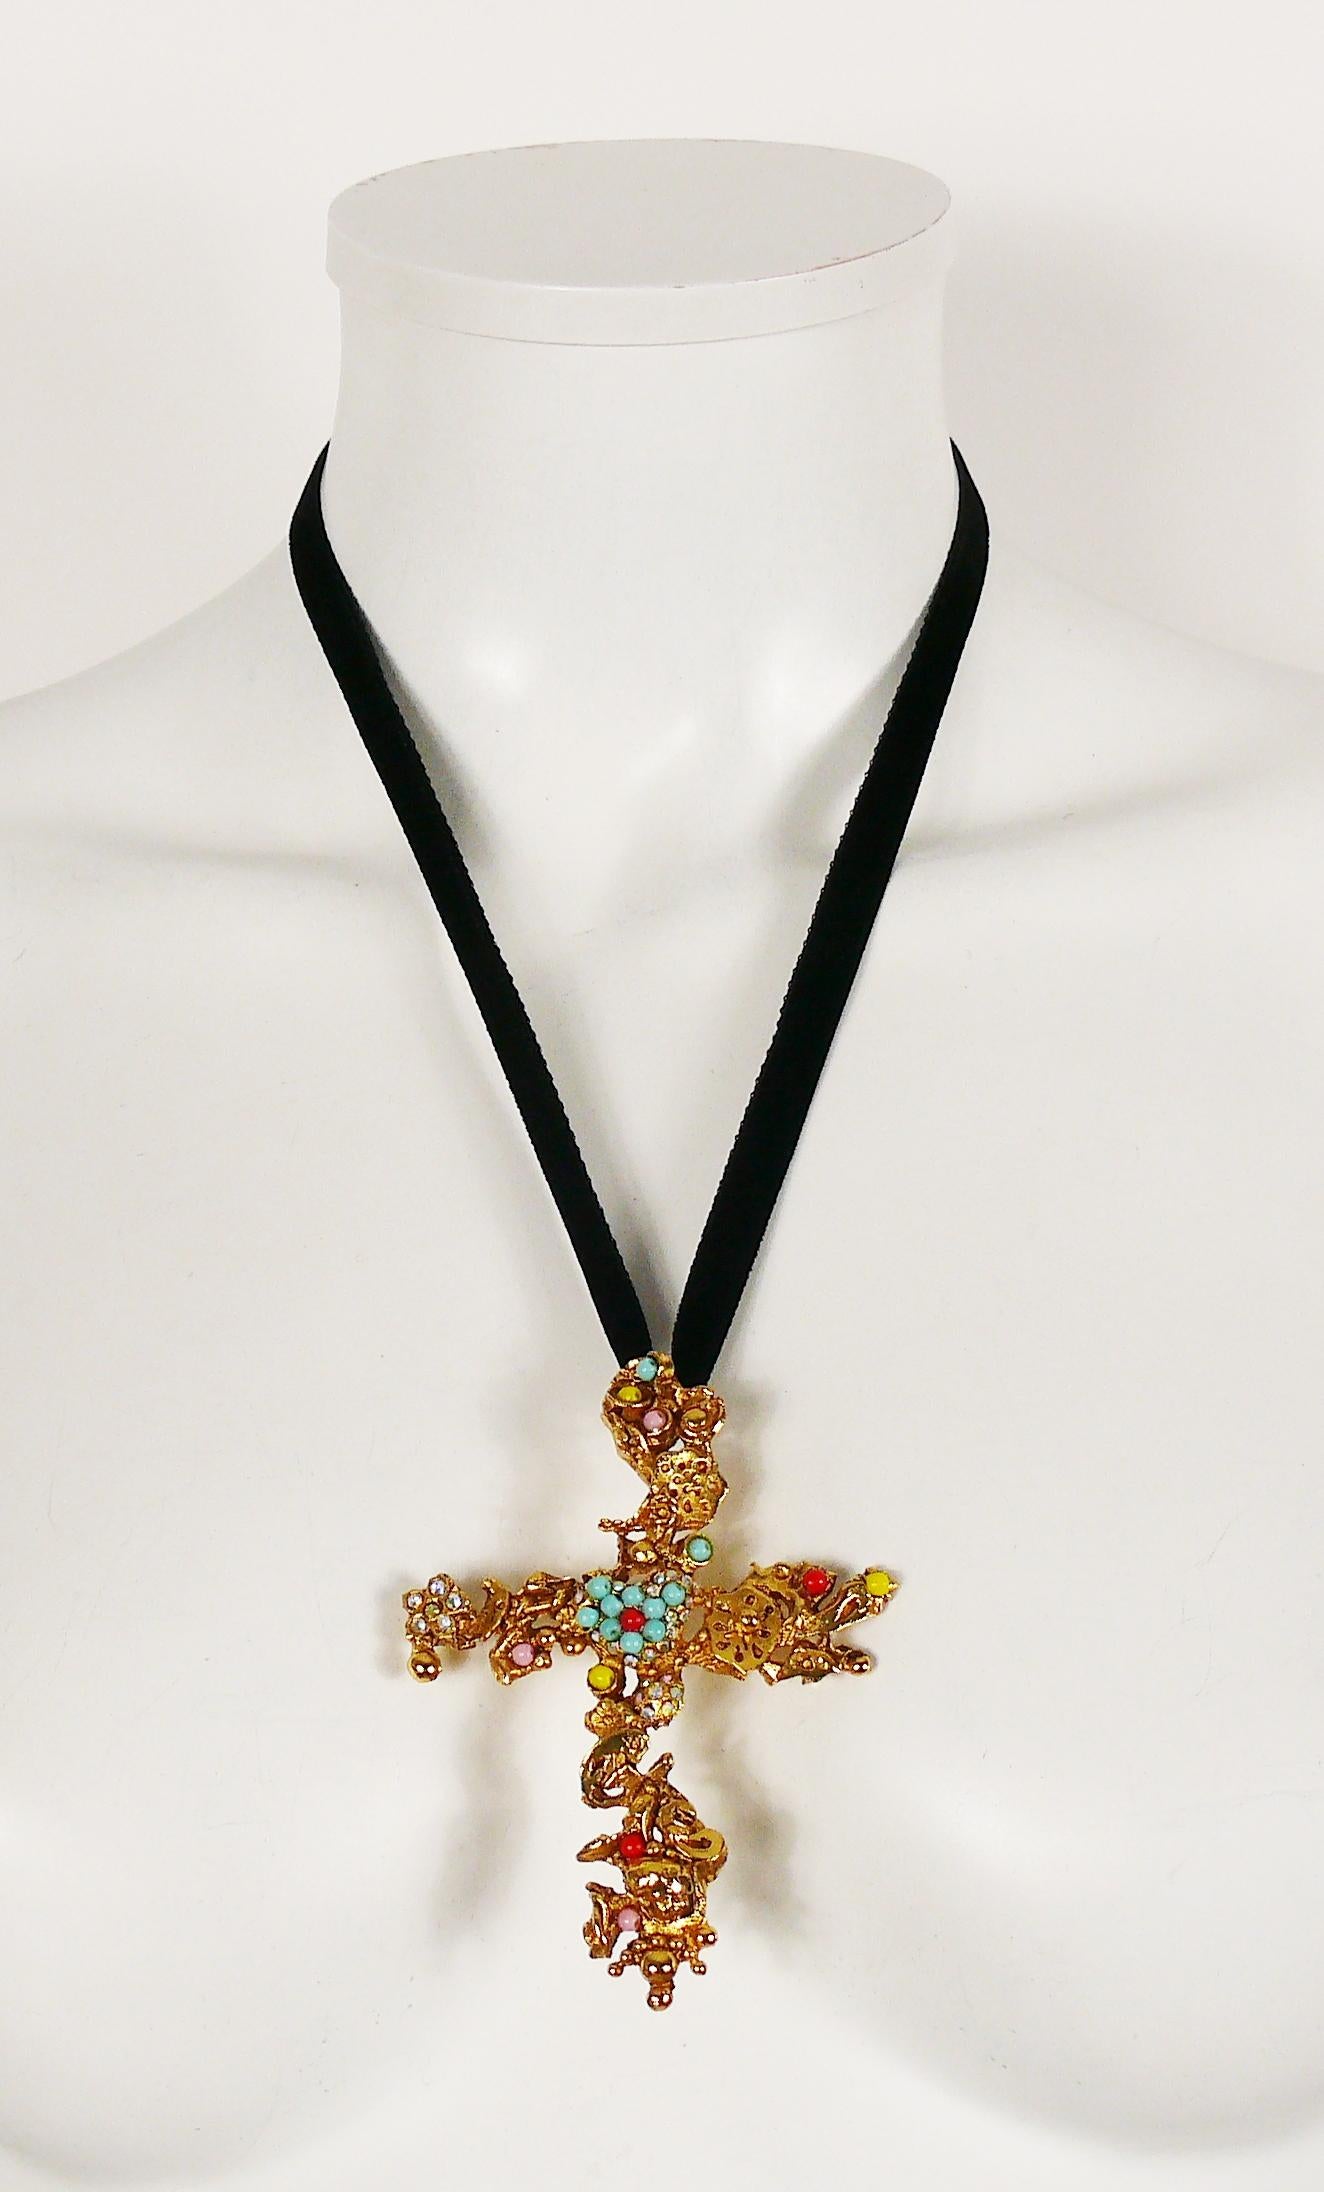 CHRISTIAN LACROIX vintage pendant necklace featuring a gold toned cross with intricate baroque pattern, crystals and colourful beads, cherub head at the bottom and CL logo.

Can be worn as a brooch.

Marked CHRISTIAN LACROIX CL Made in